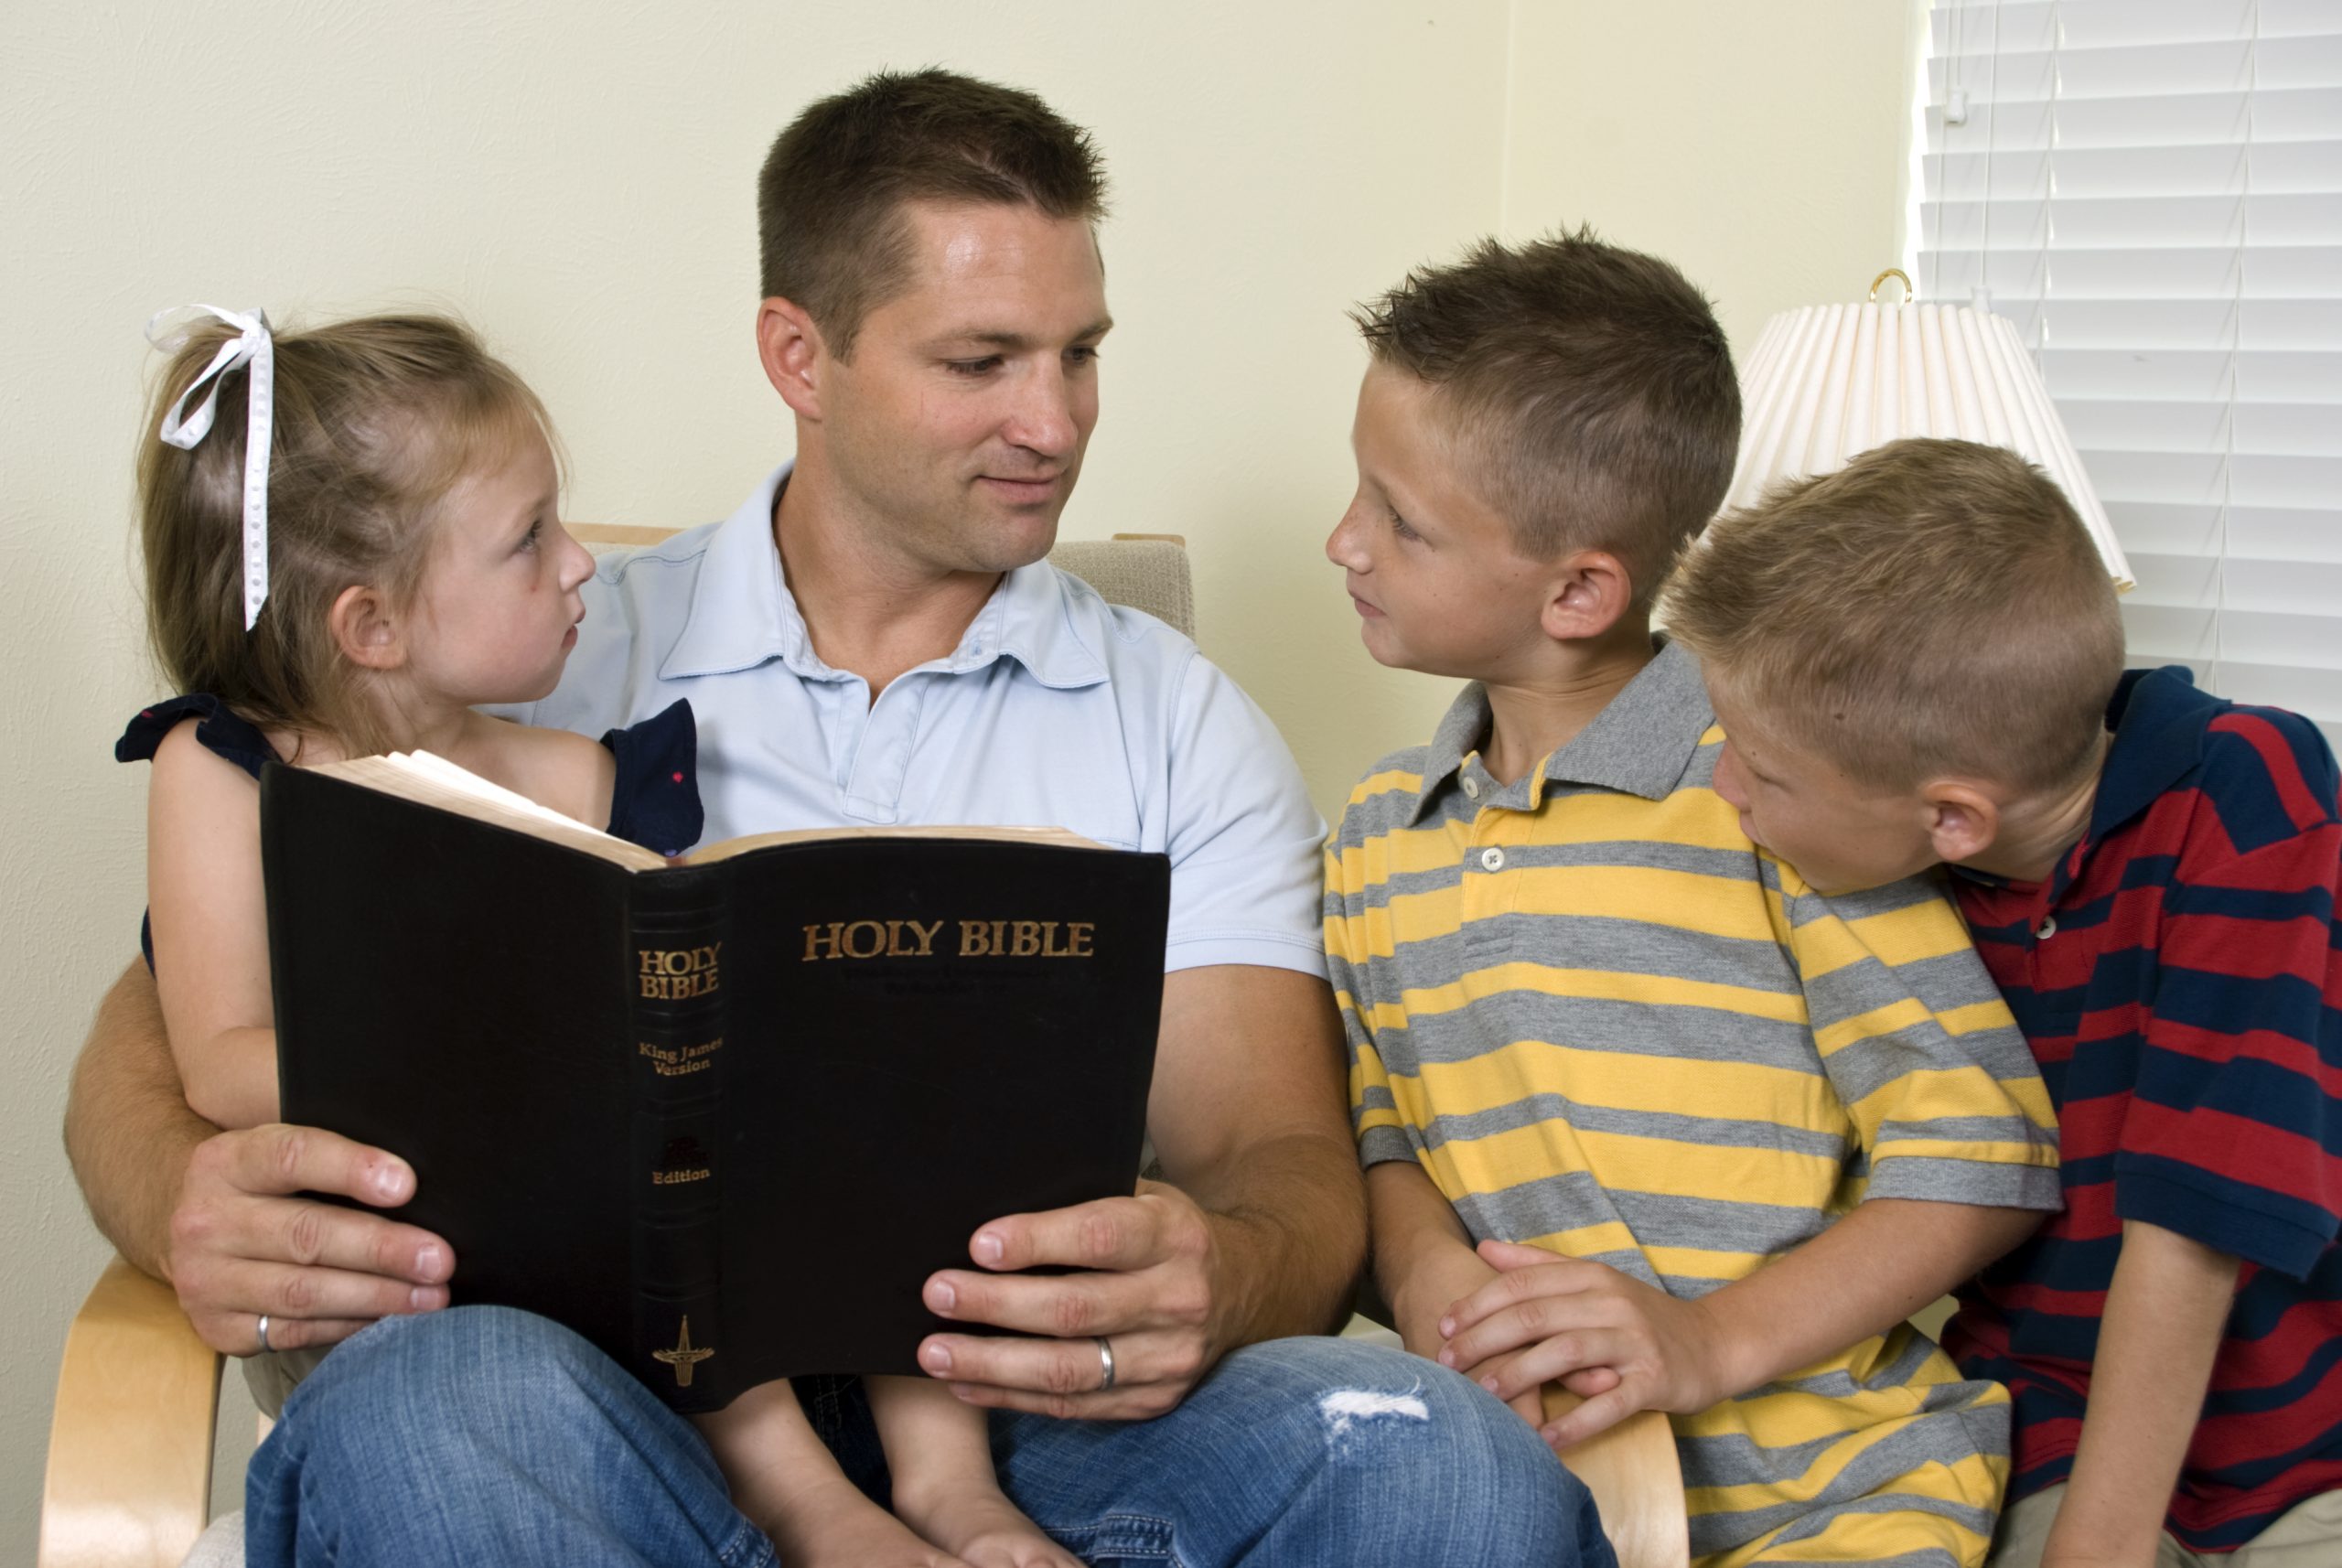 A father reads to his three young children from the Holy Bible.